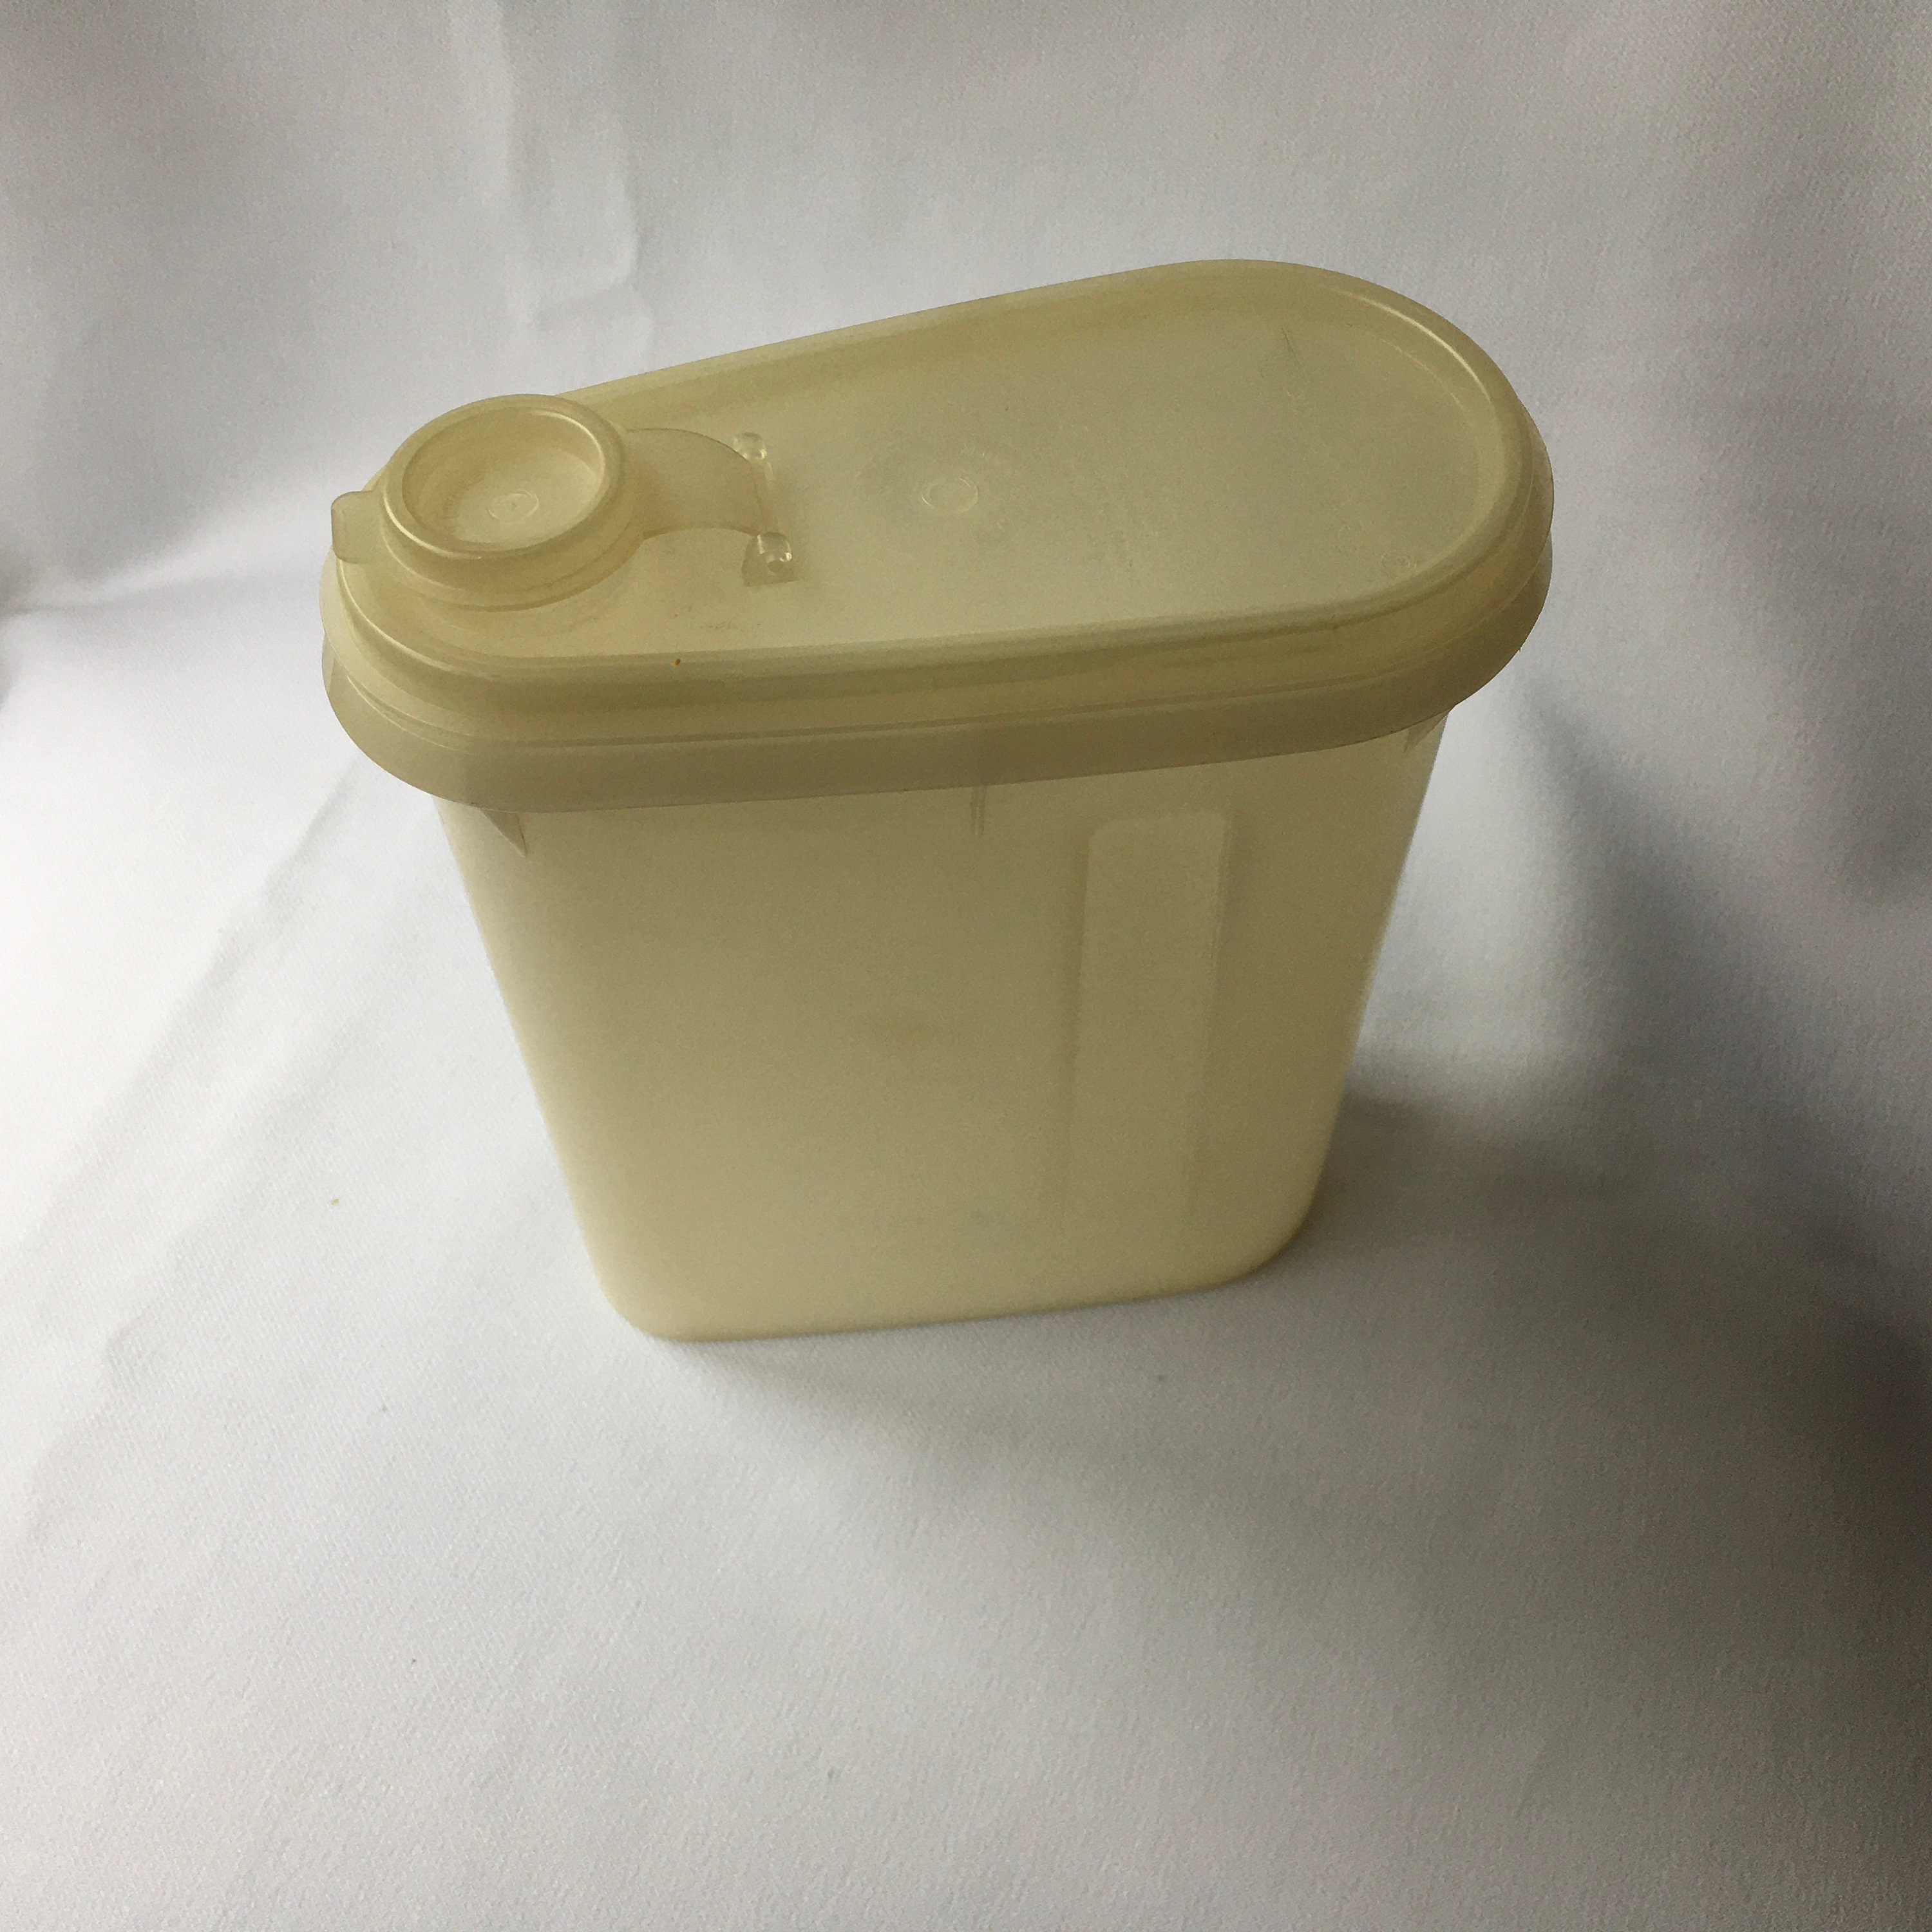 Vintage Tupperware Sandwich Containers / White Tupperware / yellow /  Container / green / Replacements / RV